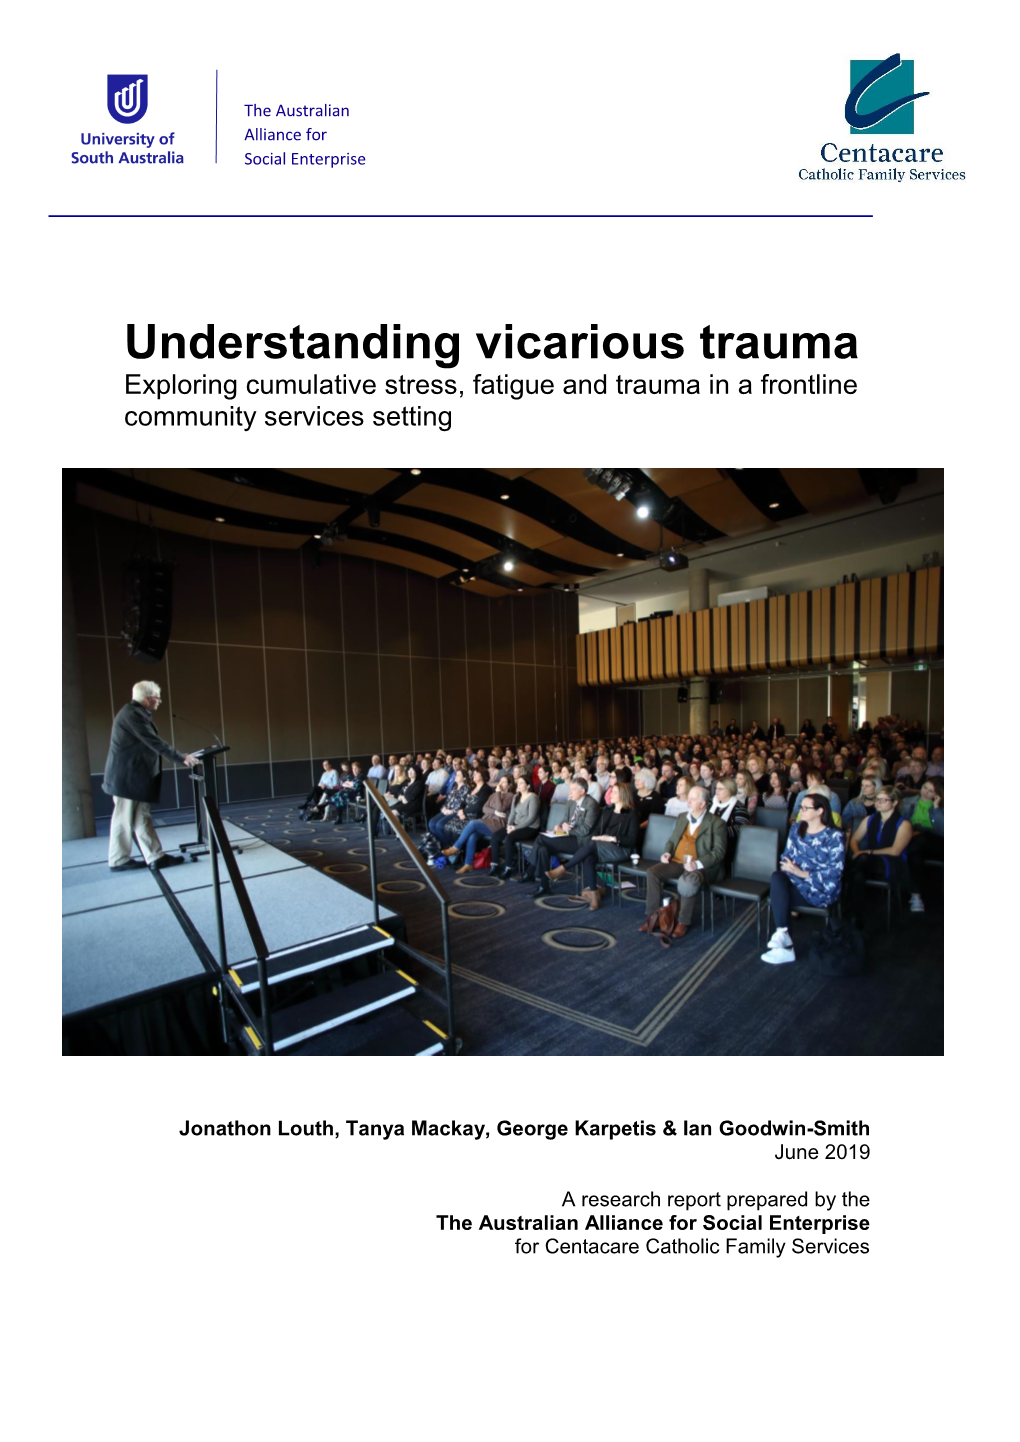 Understanding Vicarious Trauma Exploring Cumulative Stress, Fatigue and Trauma in a Frontline Community Services Setting